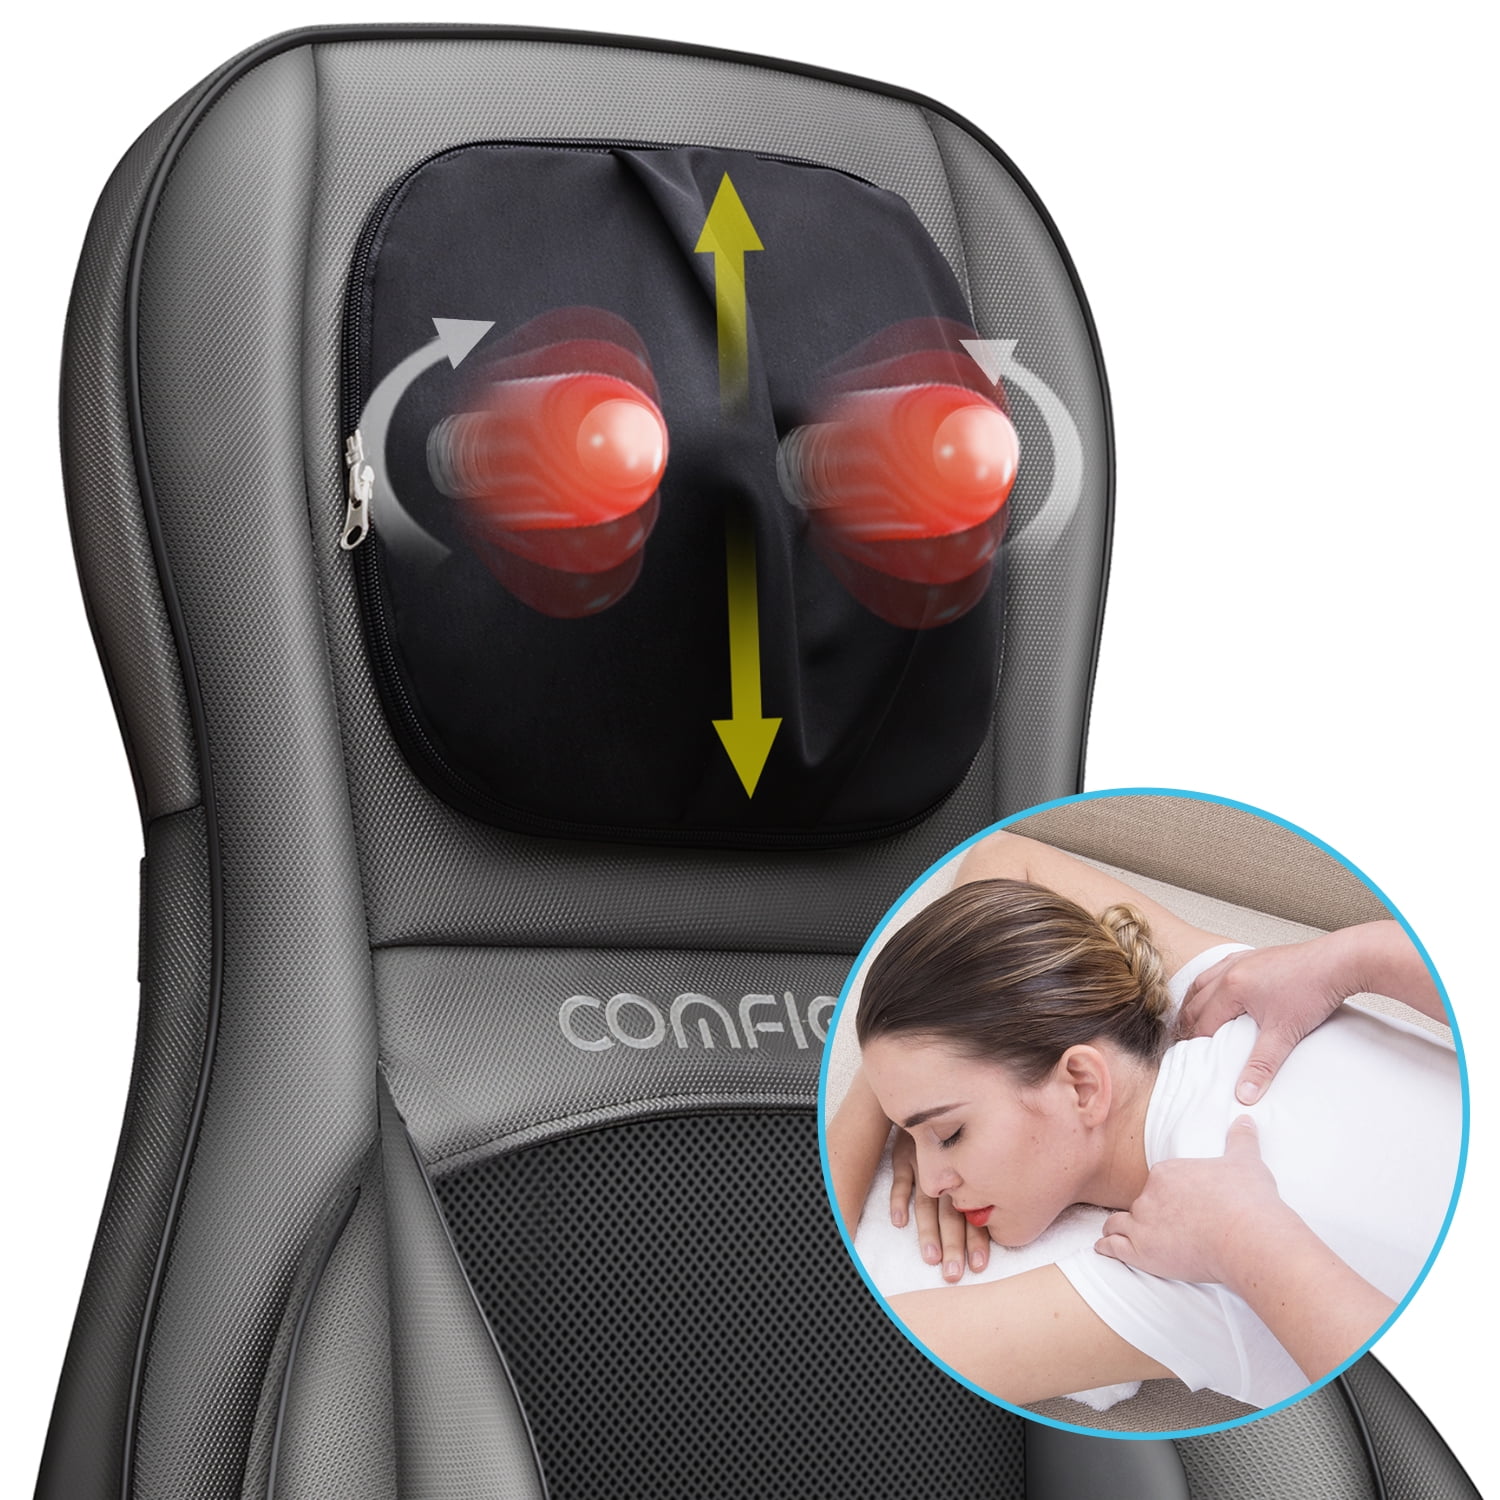 COMFIER Shiatsu Neck & Back Massager – 2D/3D Kneading Full Back Massager  with Heat & Adjustable Compression, Massage Chair Pad for Shoulder Neck and  B for Sale in Queens, NY - OfferUp